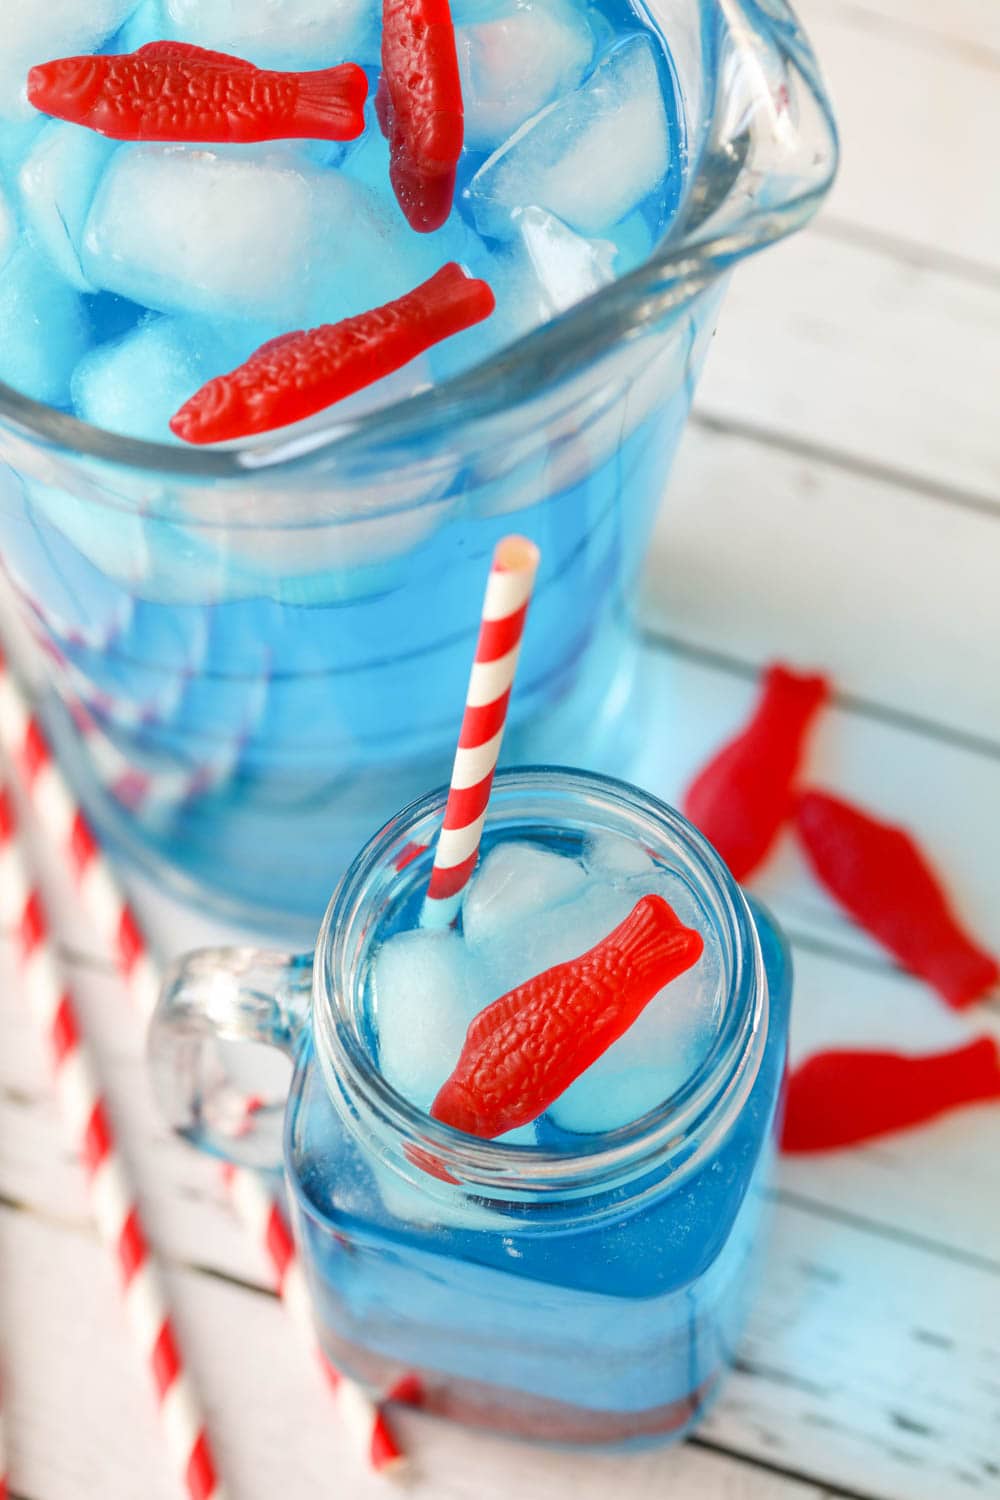 Ocean water with candy fish